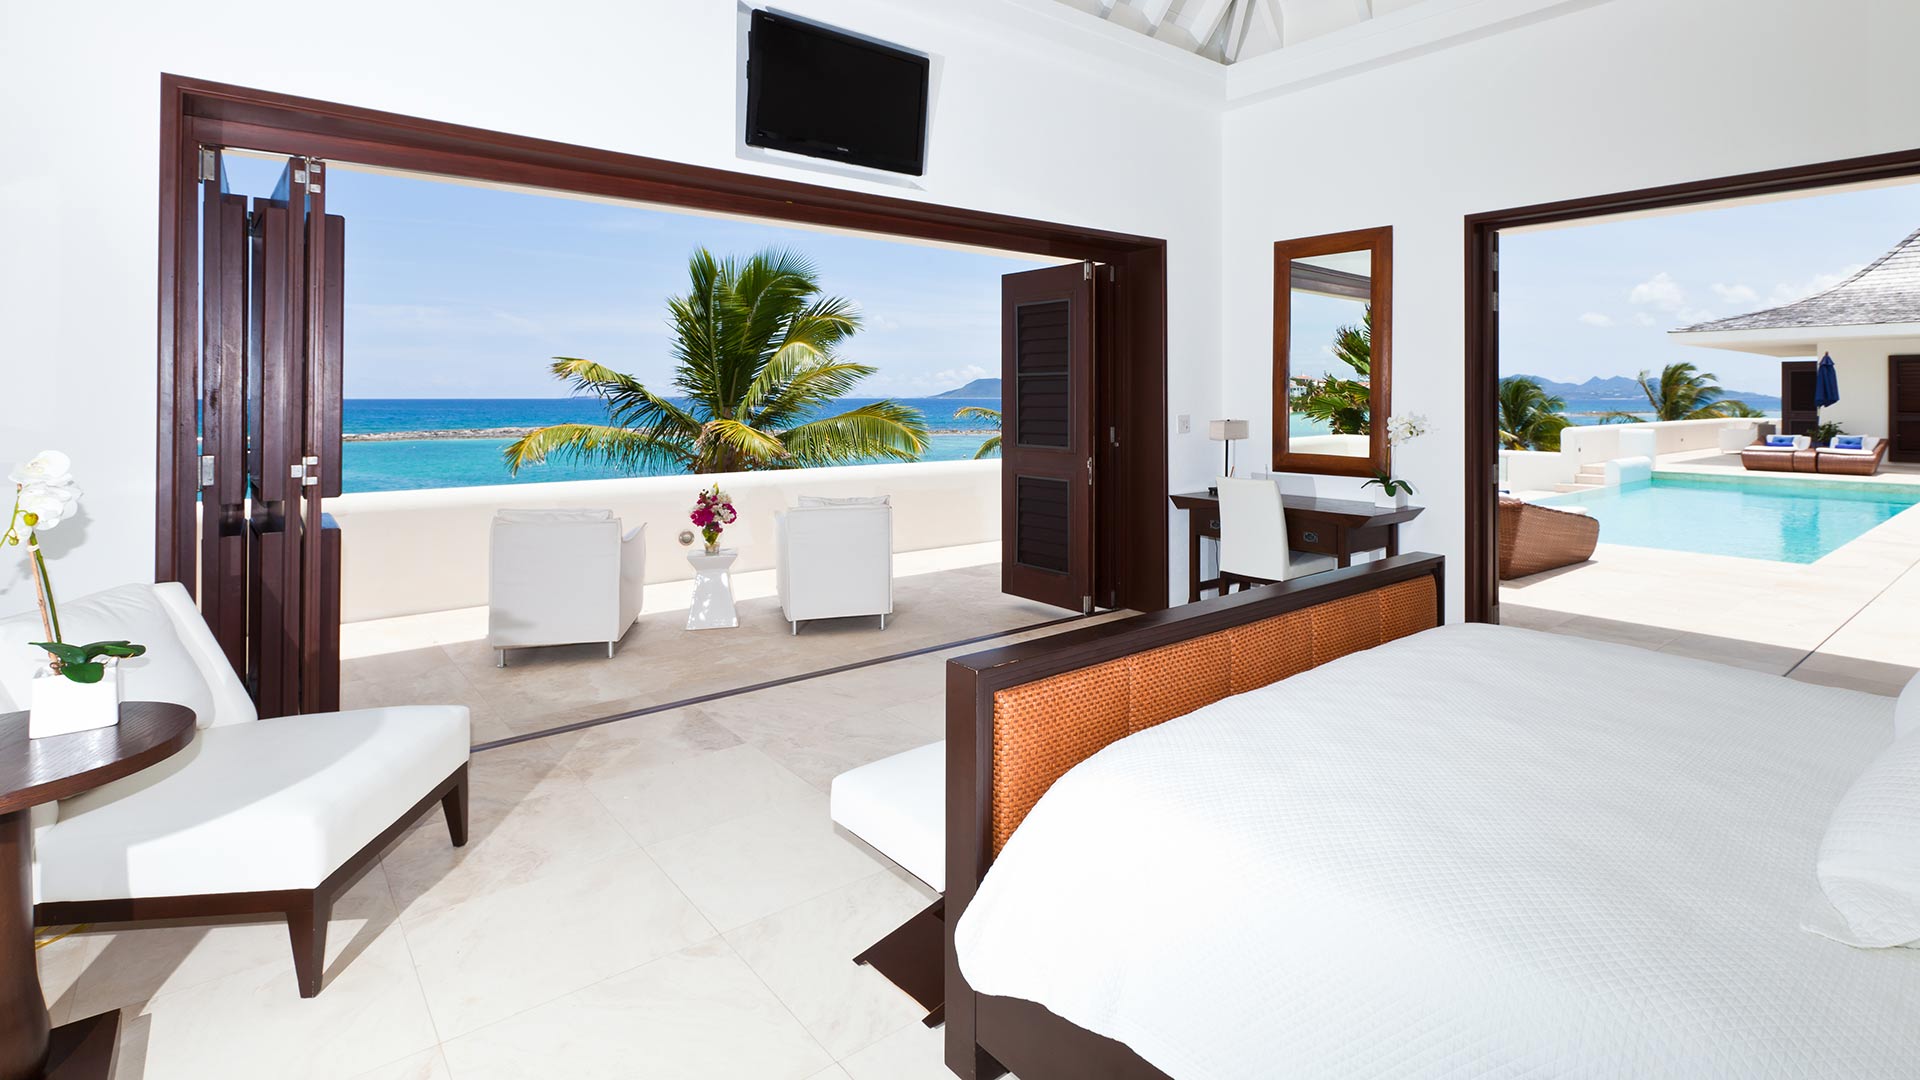 Step from the bed to the island breezes — Le Bleu Villa’s master suites open up to the natural beauty of Anguilla and delight the soul.
